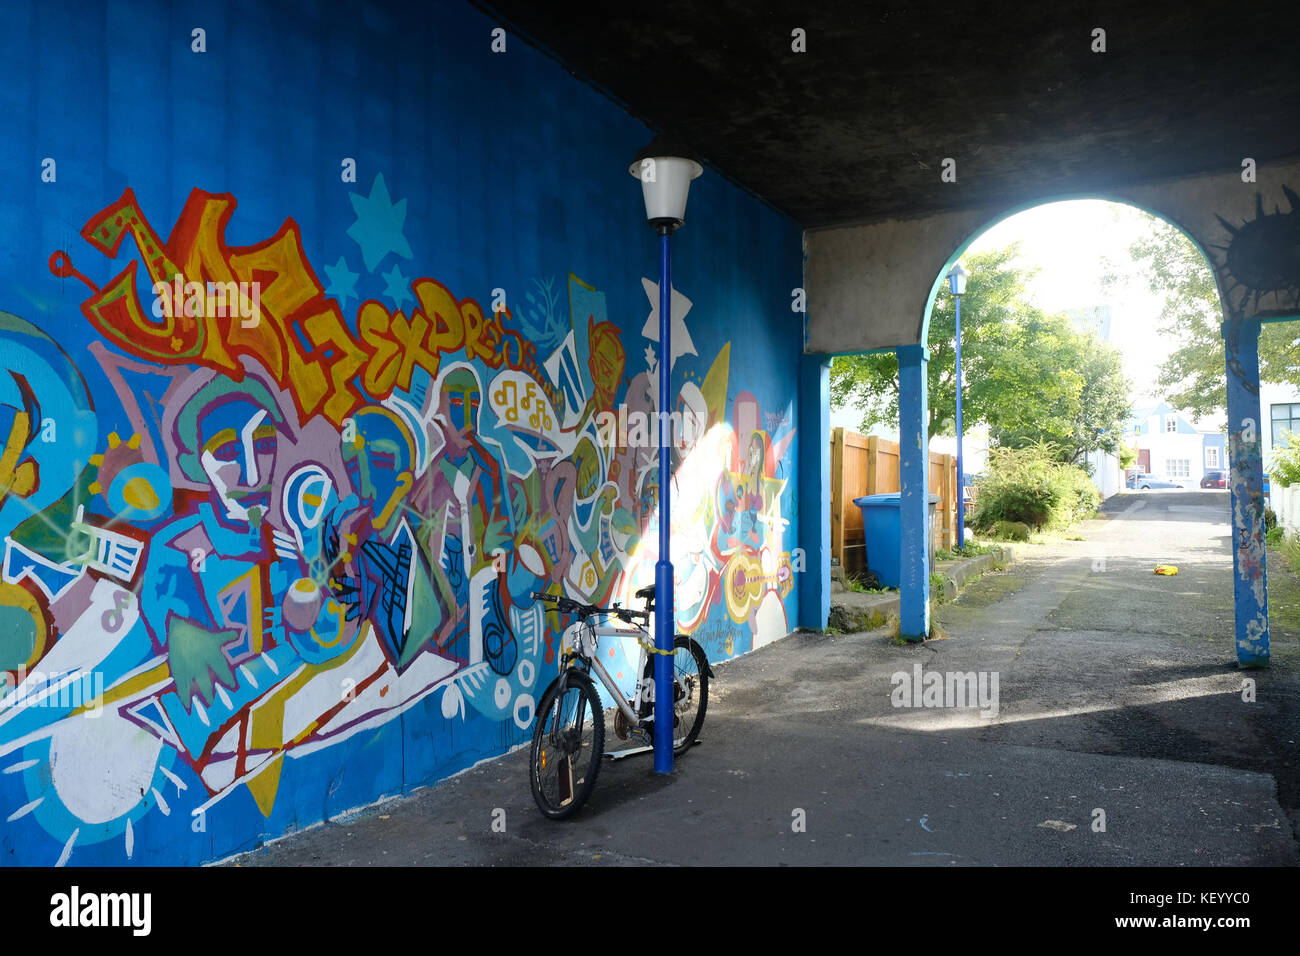 Bike leaning against blue lamppost and archway with graffiti on bright wall in old harbour area of Reykjavik capital city, Iceland Stock Photo